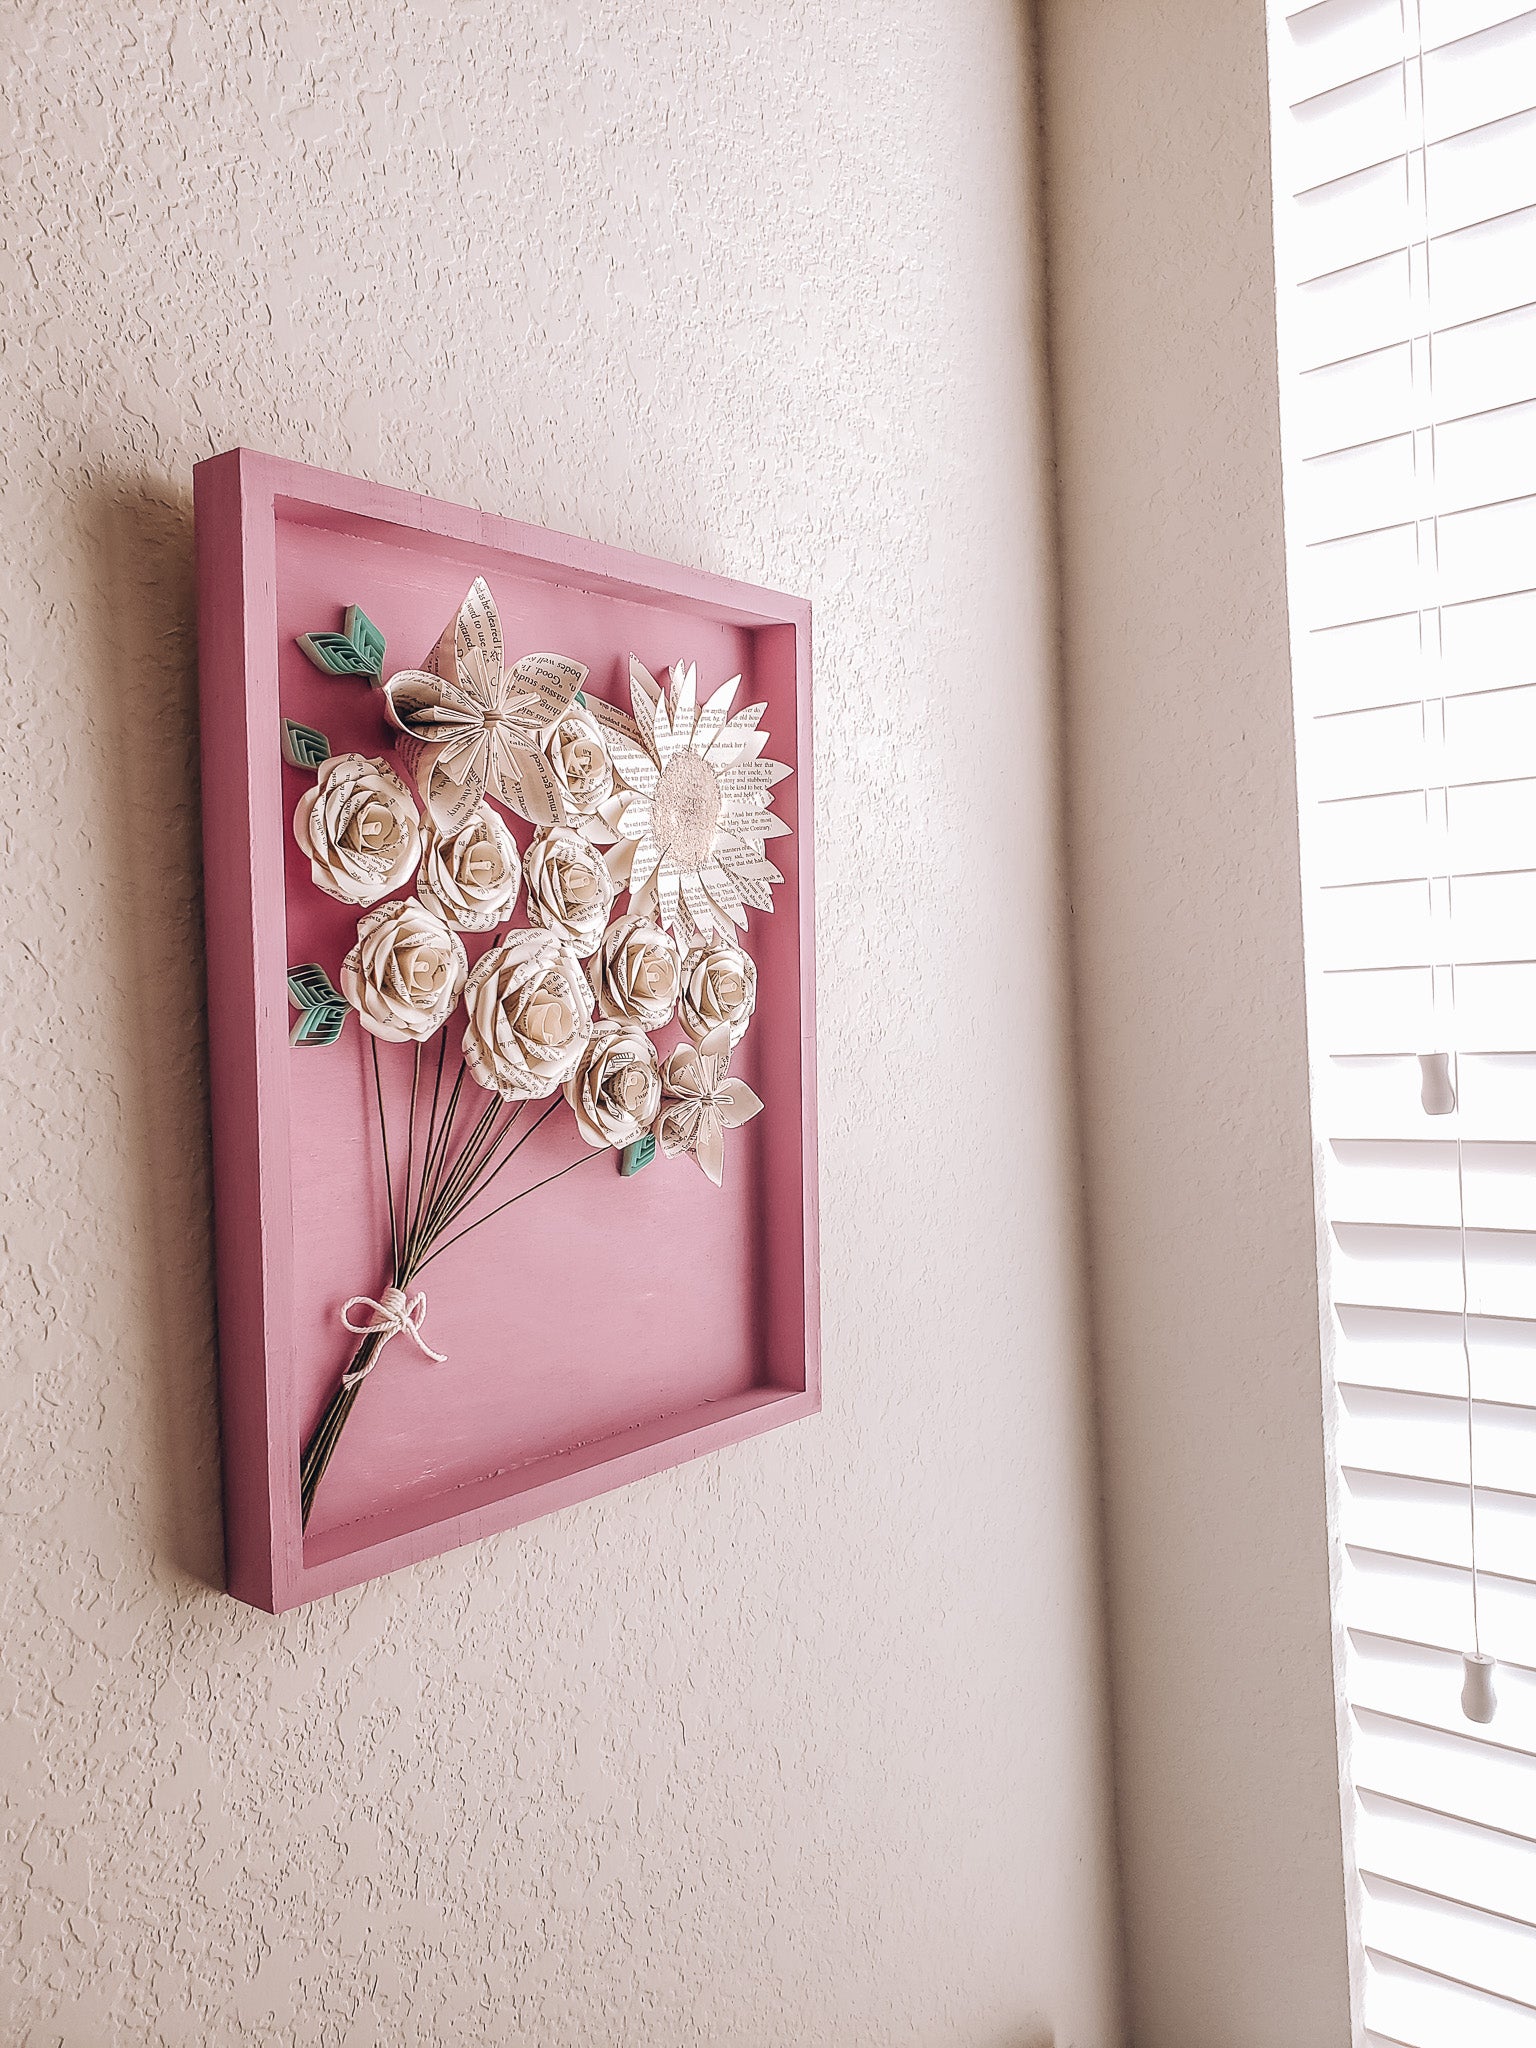 Framed art piece of book page paper flowers in the shape of a bouquet - Novel Blossoms Co